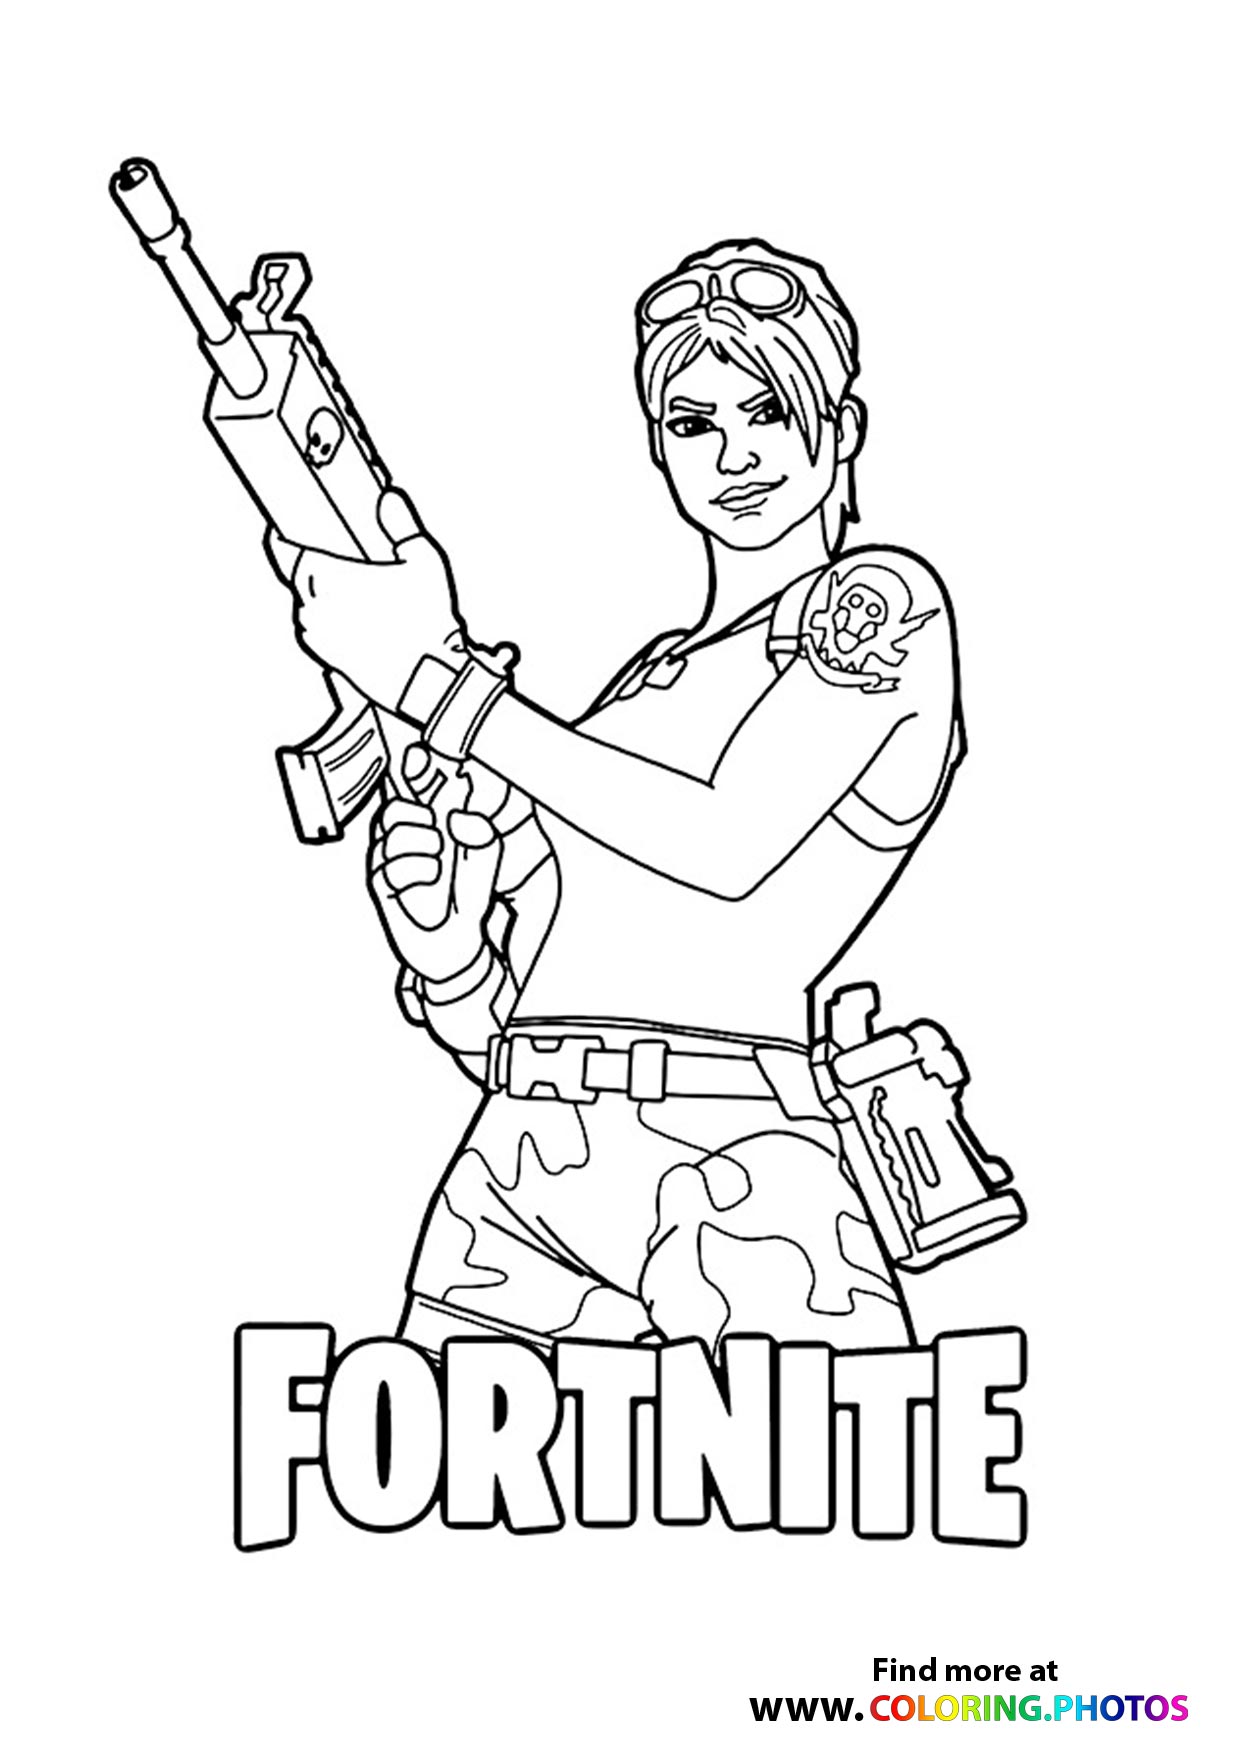 Fortnite   Coloring Pages for kids